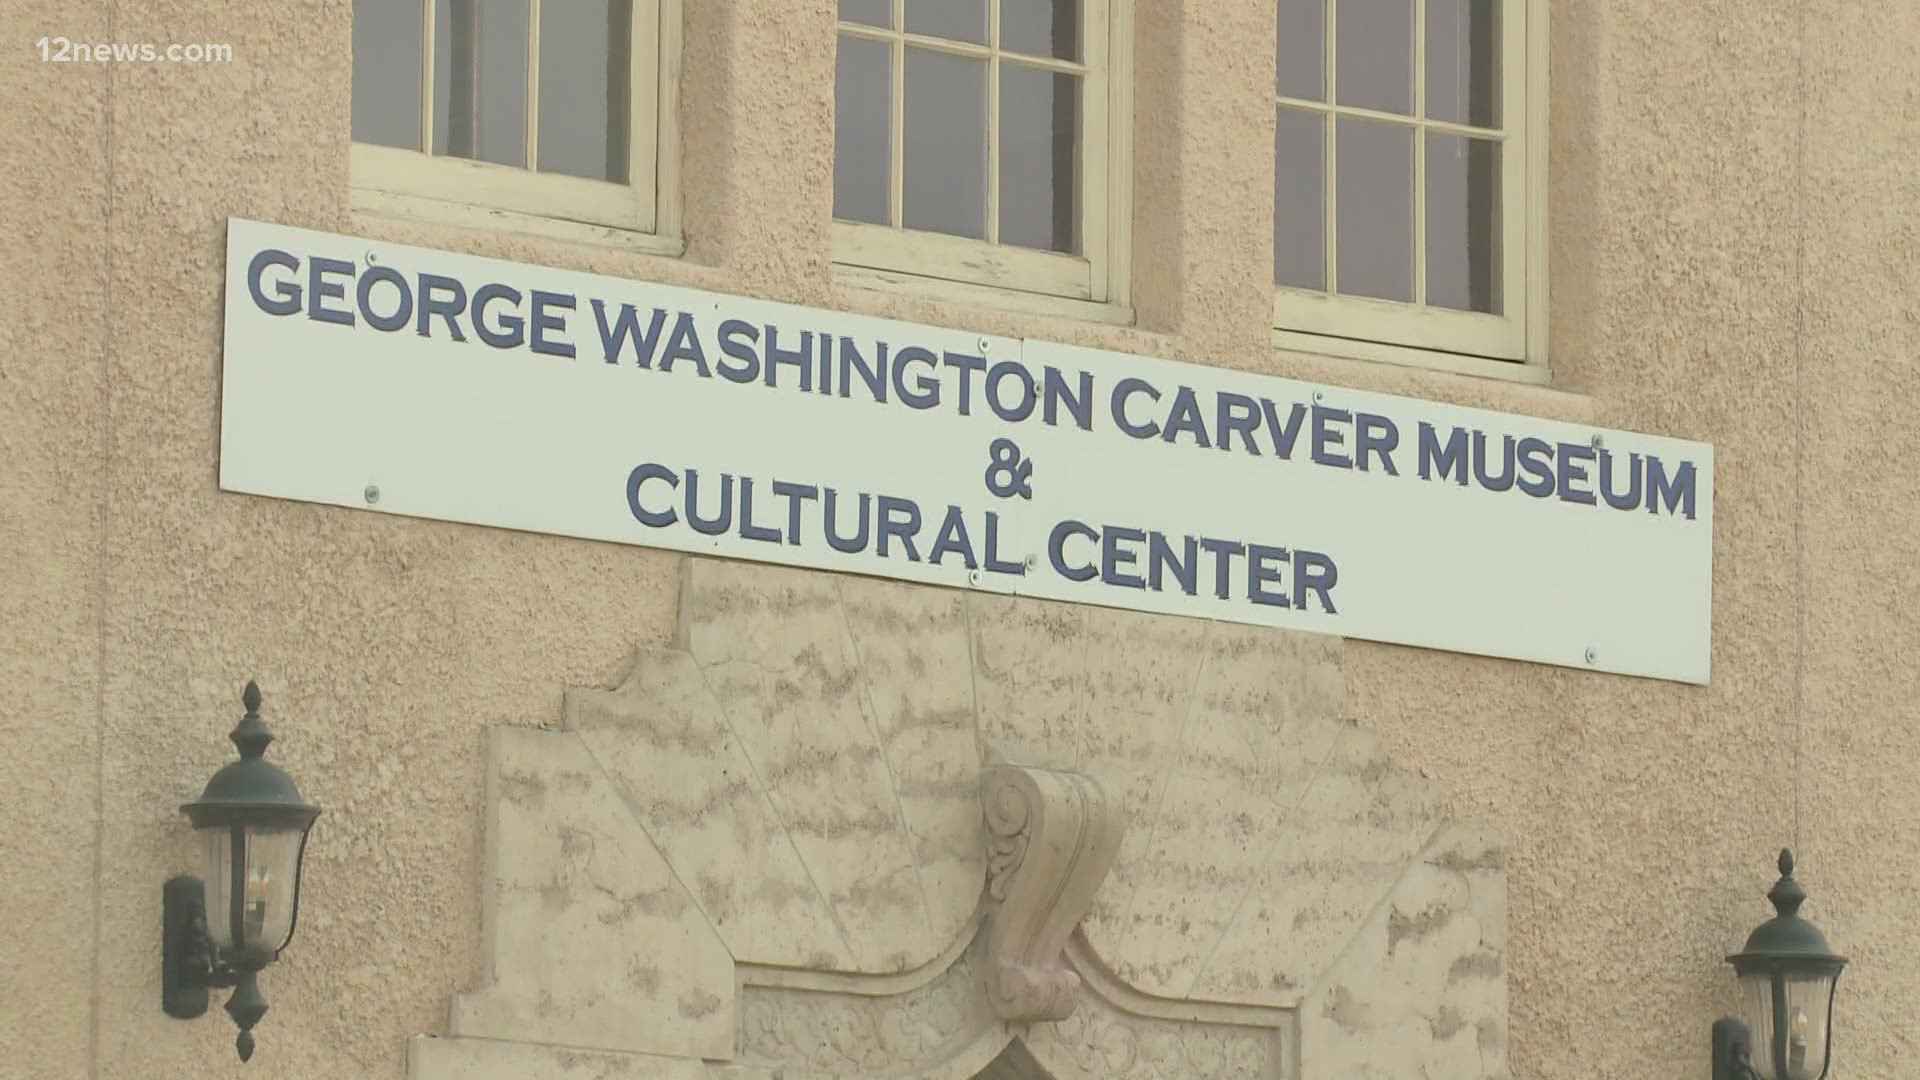 Two swastikas were spray-painted onto the entrance of the Washington Carver Museum and Cultural Center in Phoenix.